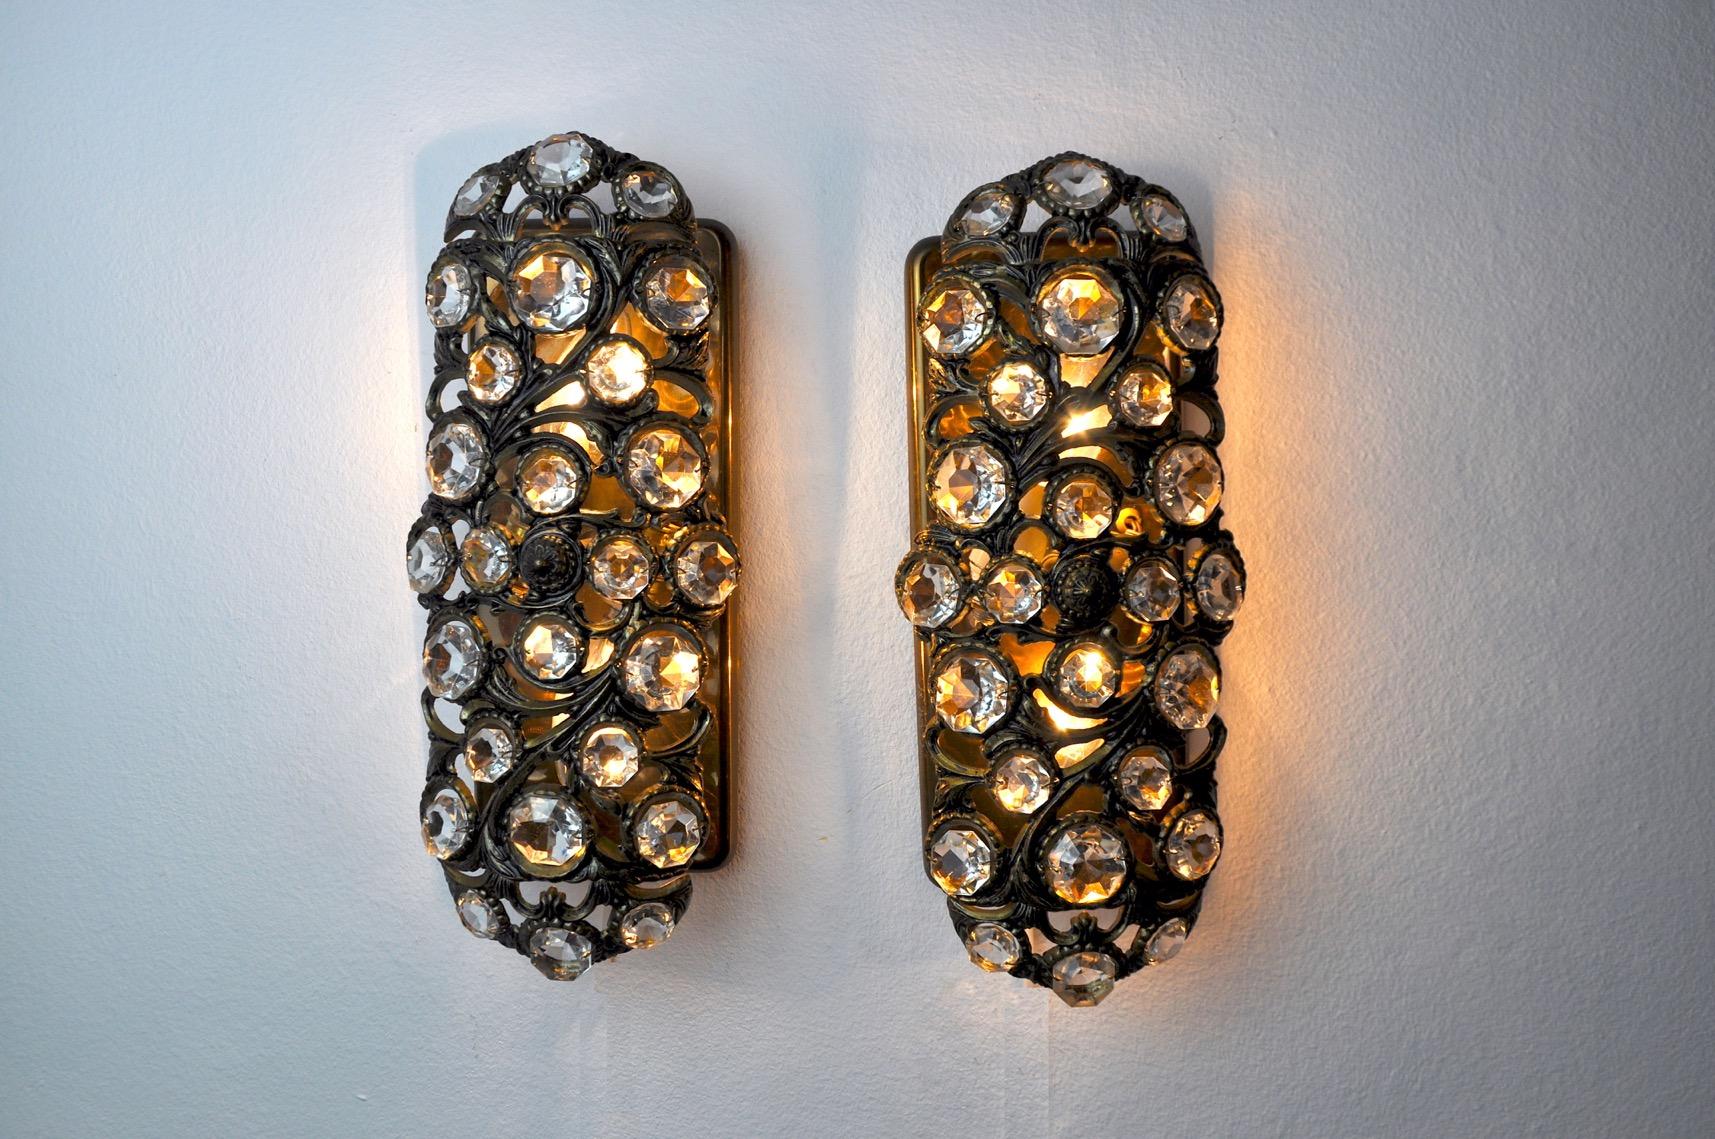 Rare pair of palwa sconces designed by ernest palm and produced in the 60s in barcelona. Brass structure composed of crystals cut in perfect condition. Rare design object that will illuminate your interior perfectly. Verified electricity, time marks